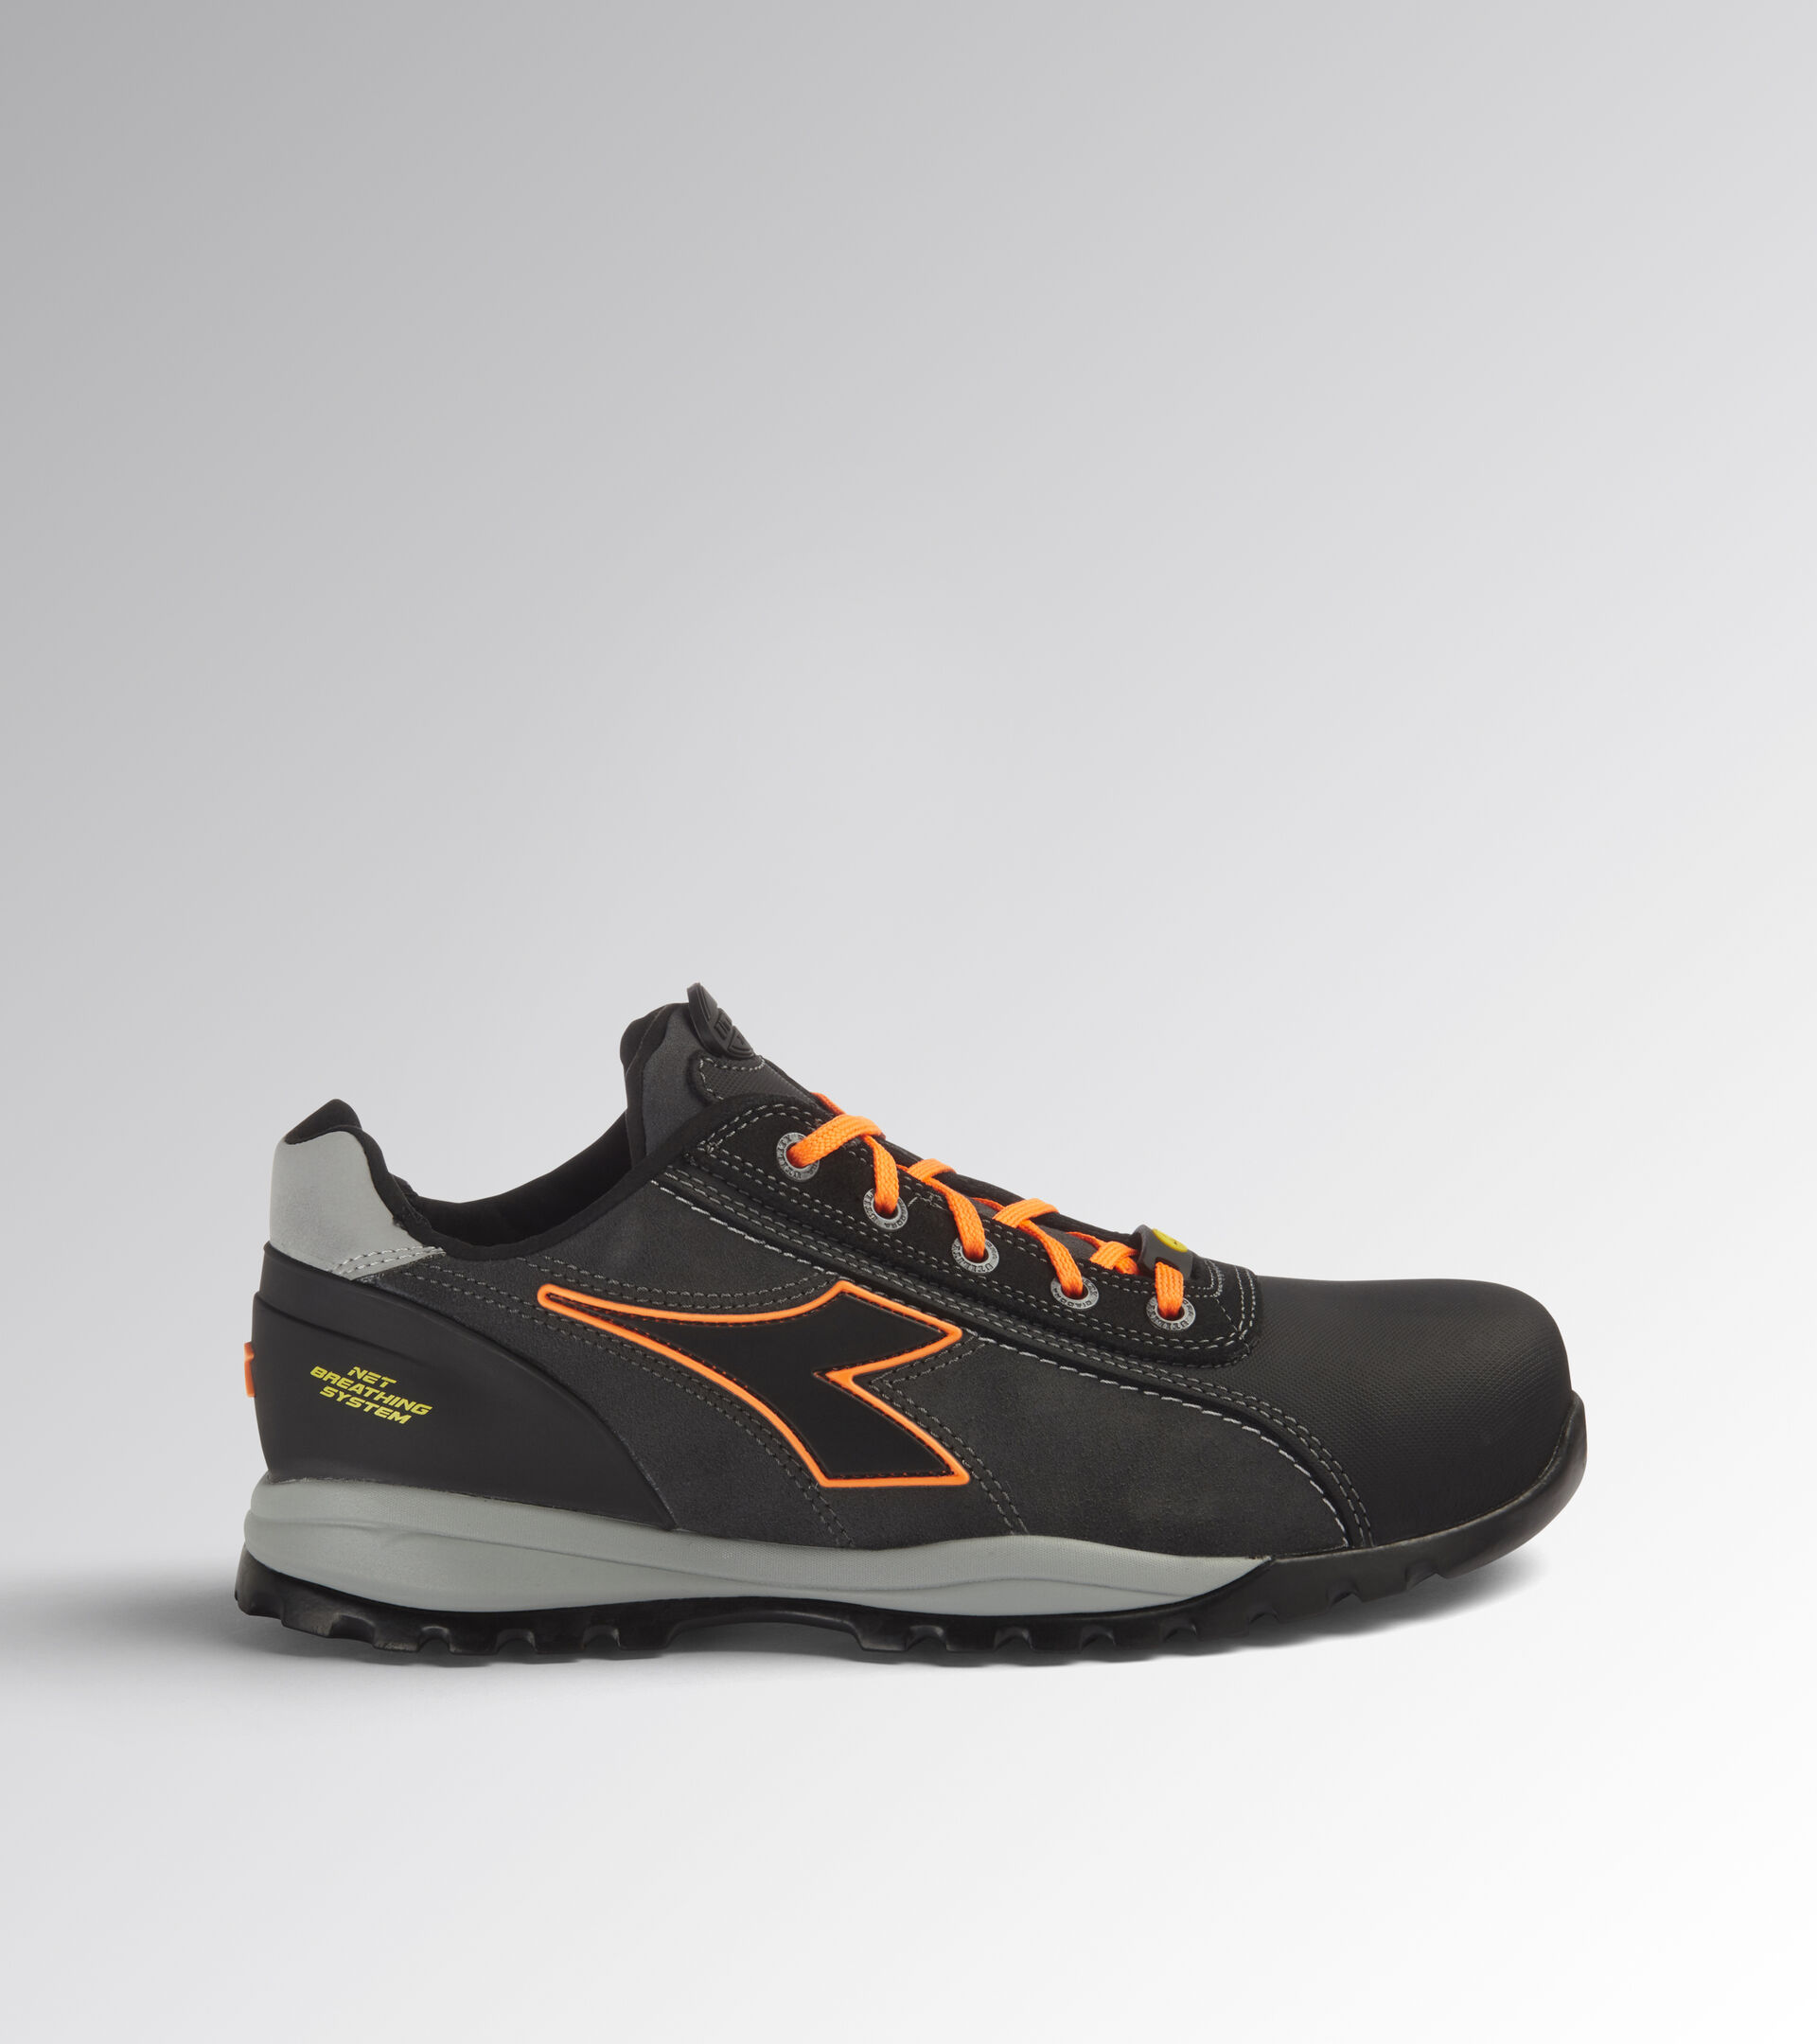 ᐉ DIADORA GLOVE II LOW S3 HRO SRA Safety shoes 2407 → Low shoes at Top  Prices —